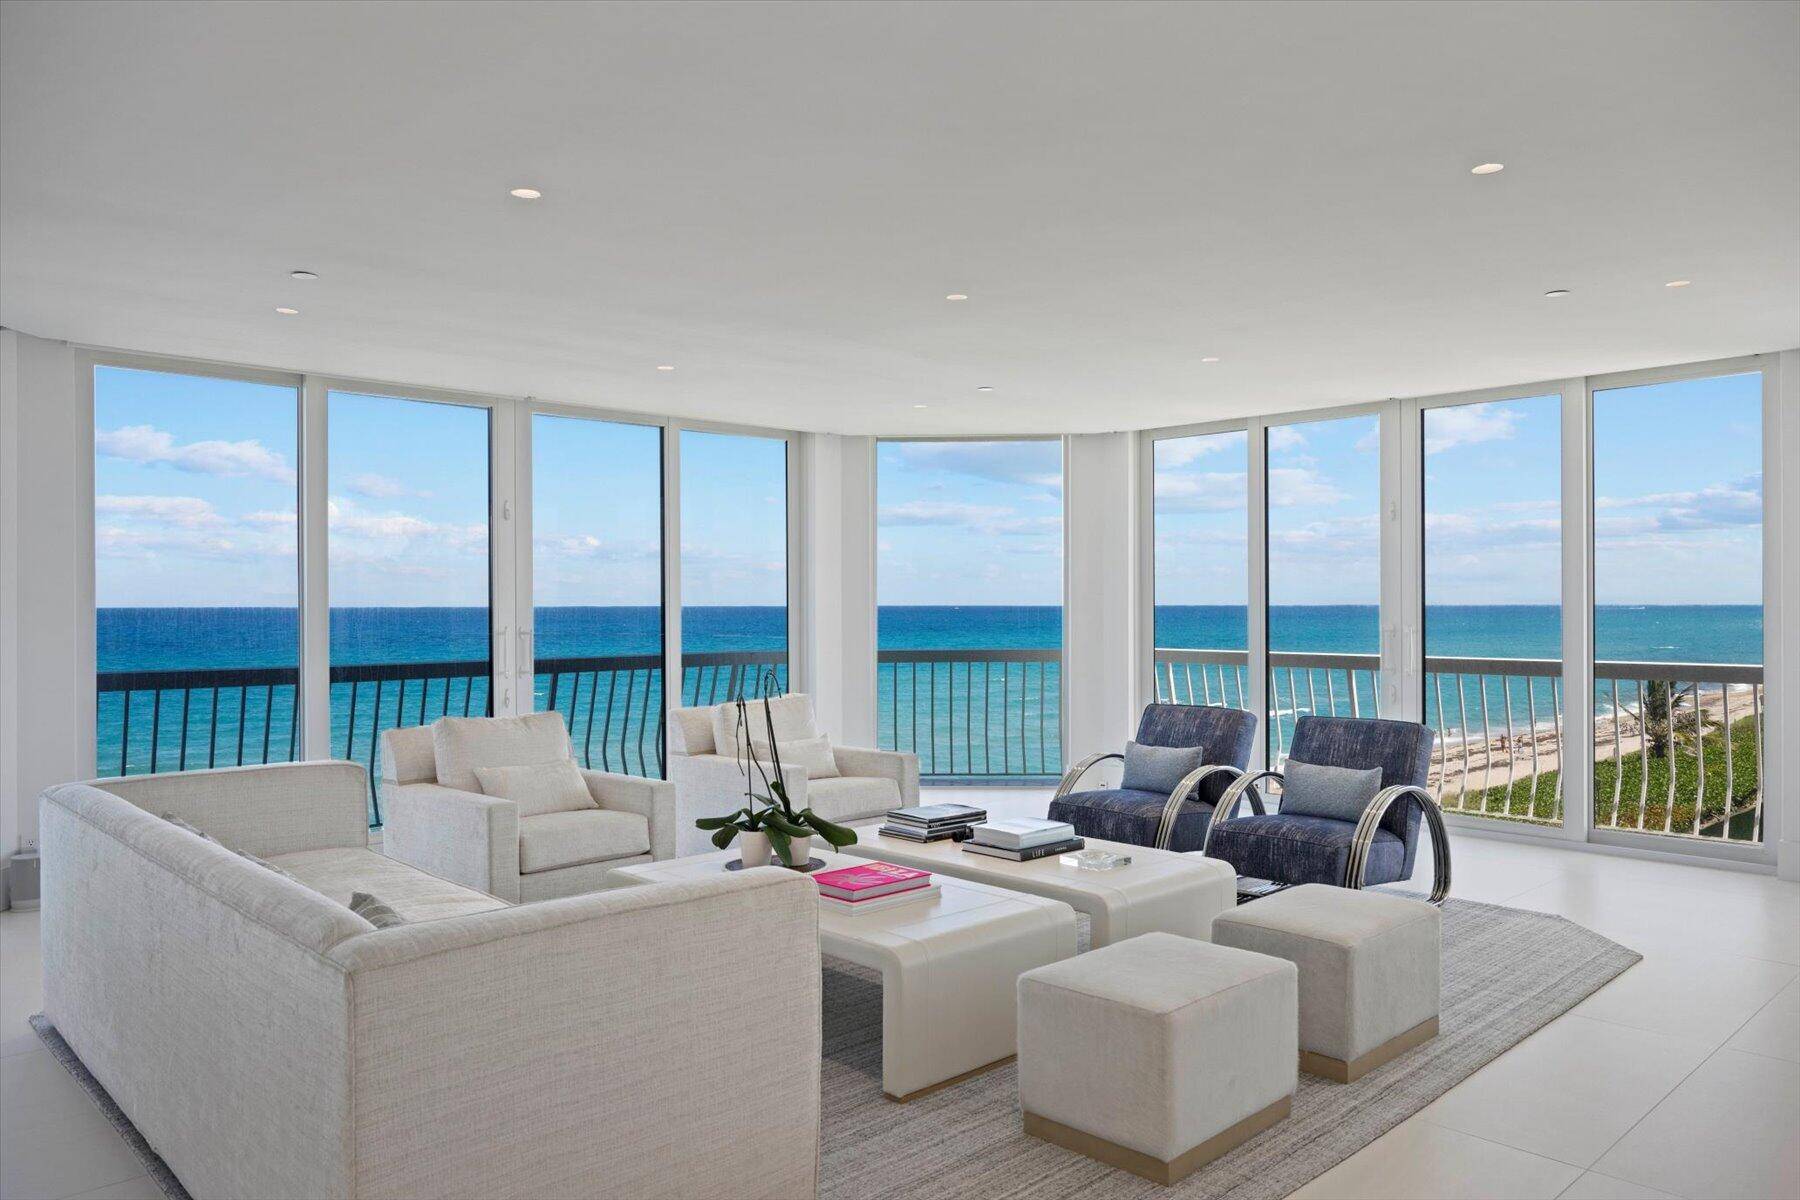 Stunningly renovated to perfection at Sloan's Curve in a contemporary style, this 3 3 has the most far reaching panoramic ocean and beach views and a desirable southeast exposure.